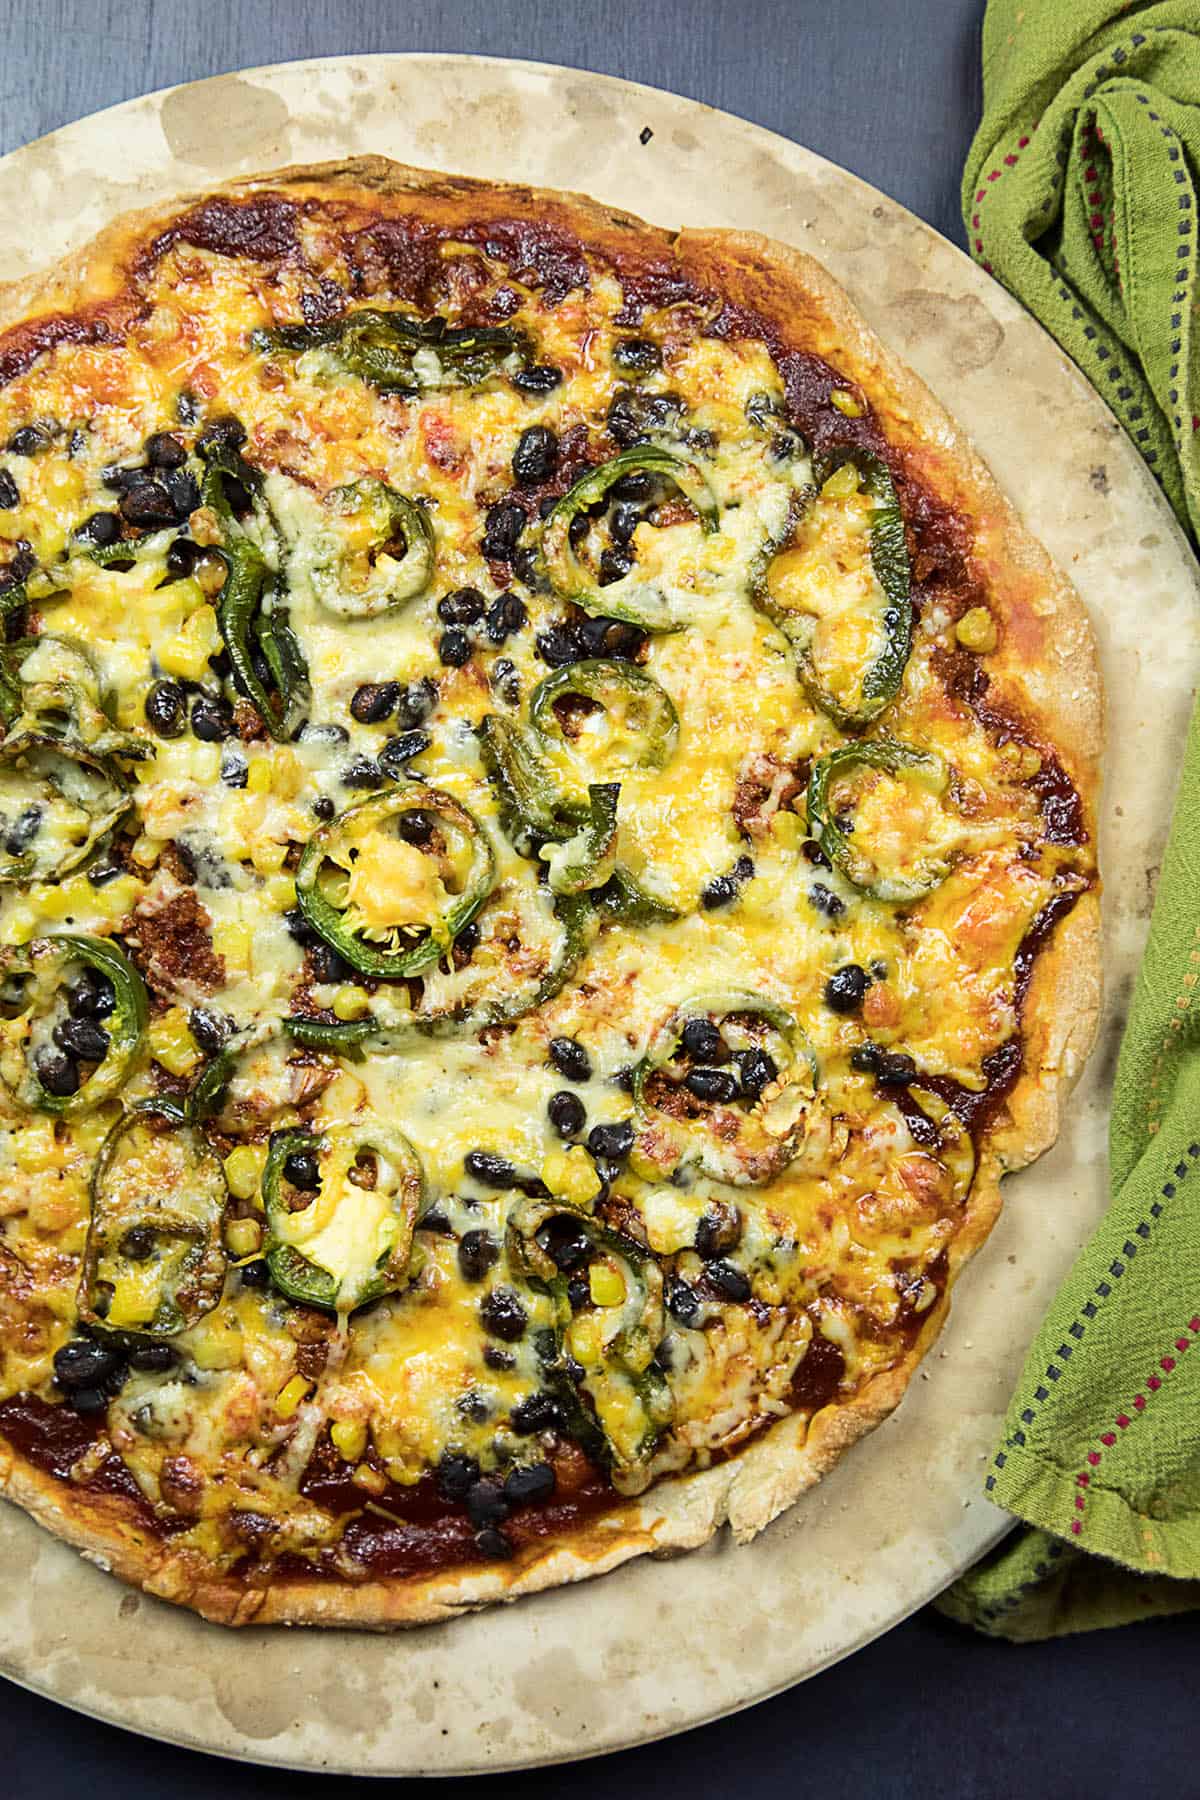 Homemade Southwest-Style Pizza served hot and ready